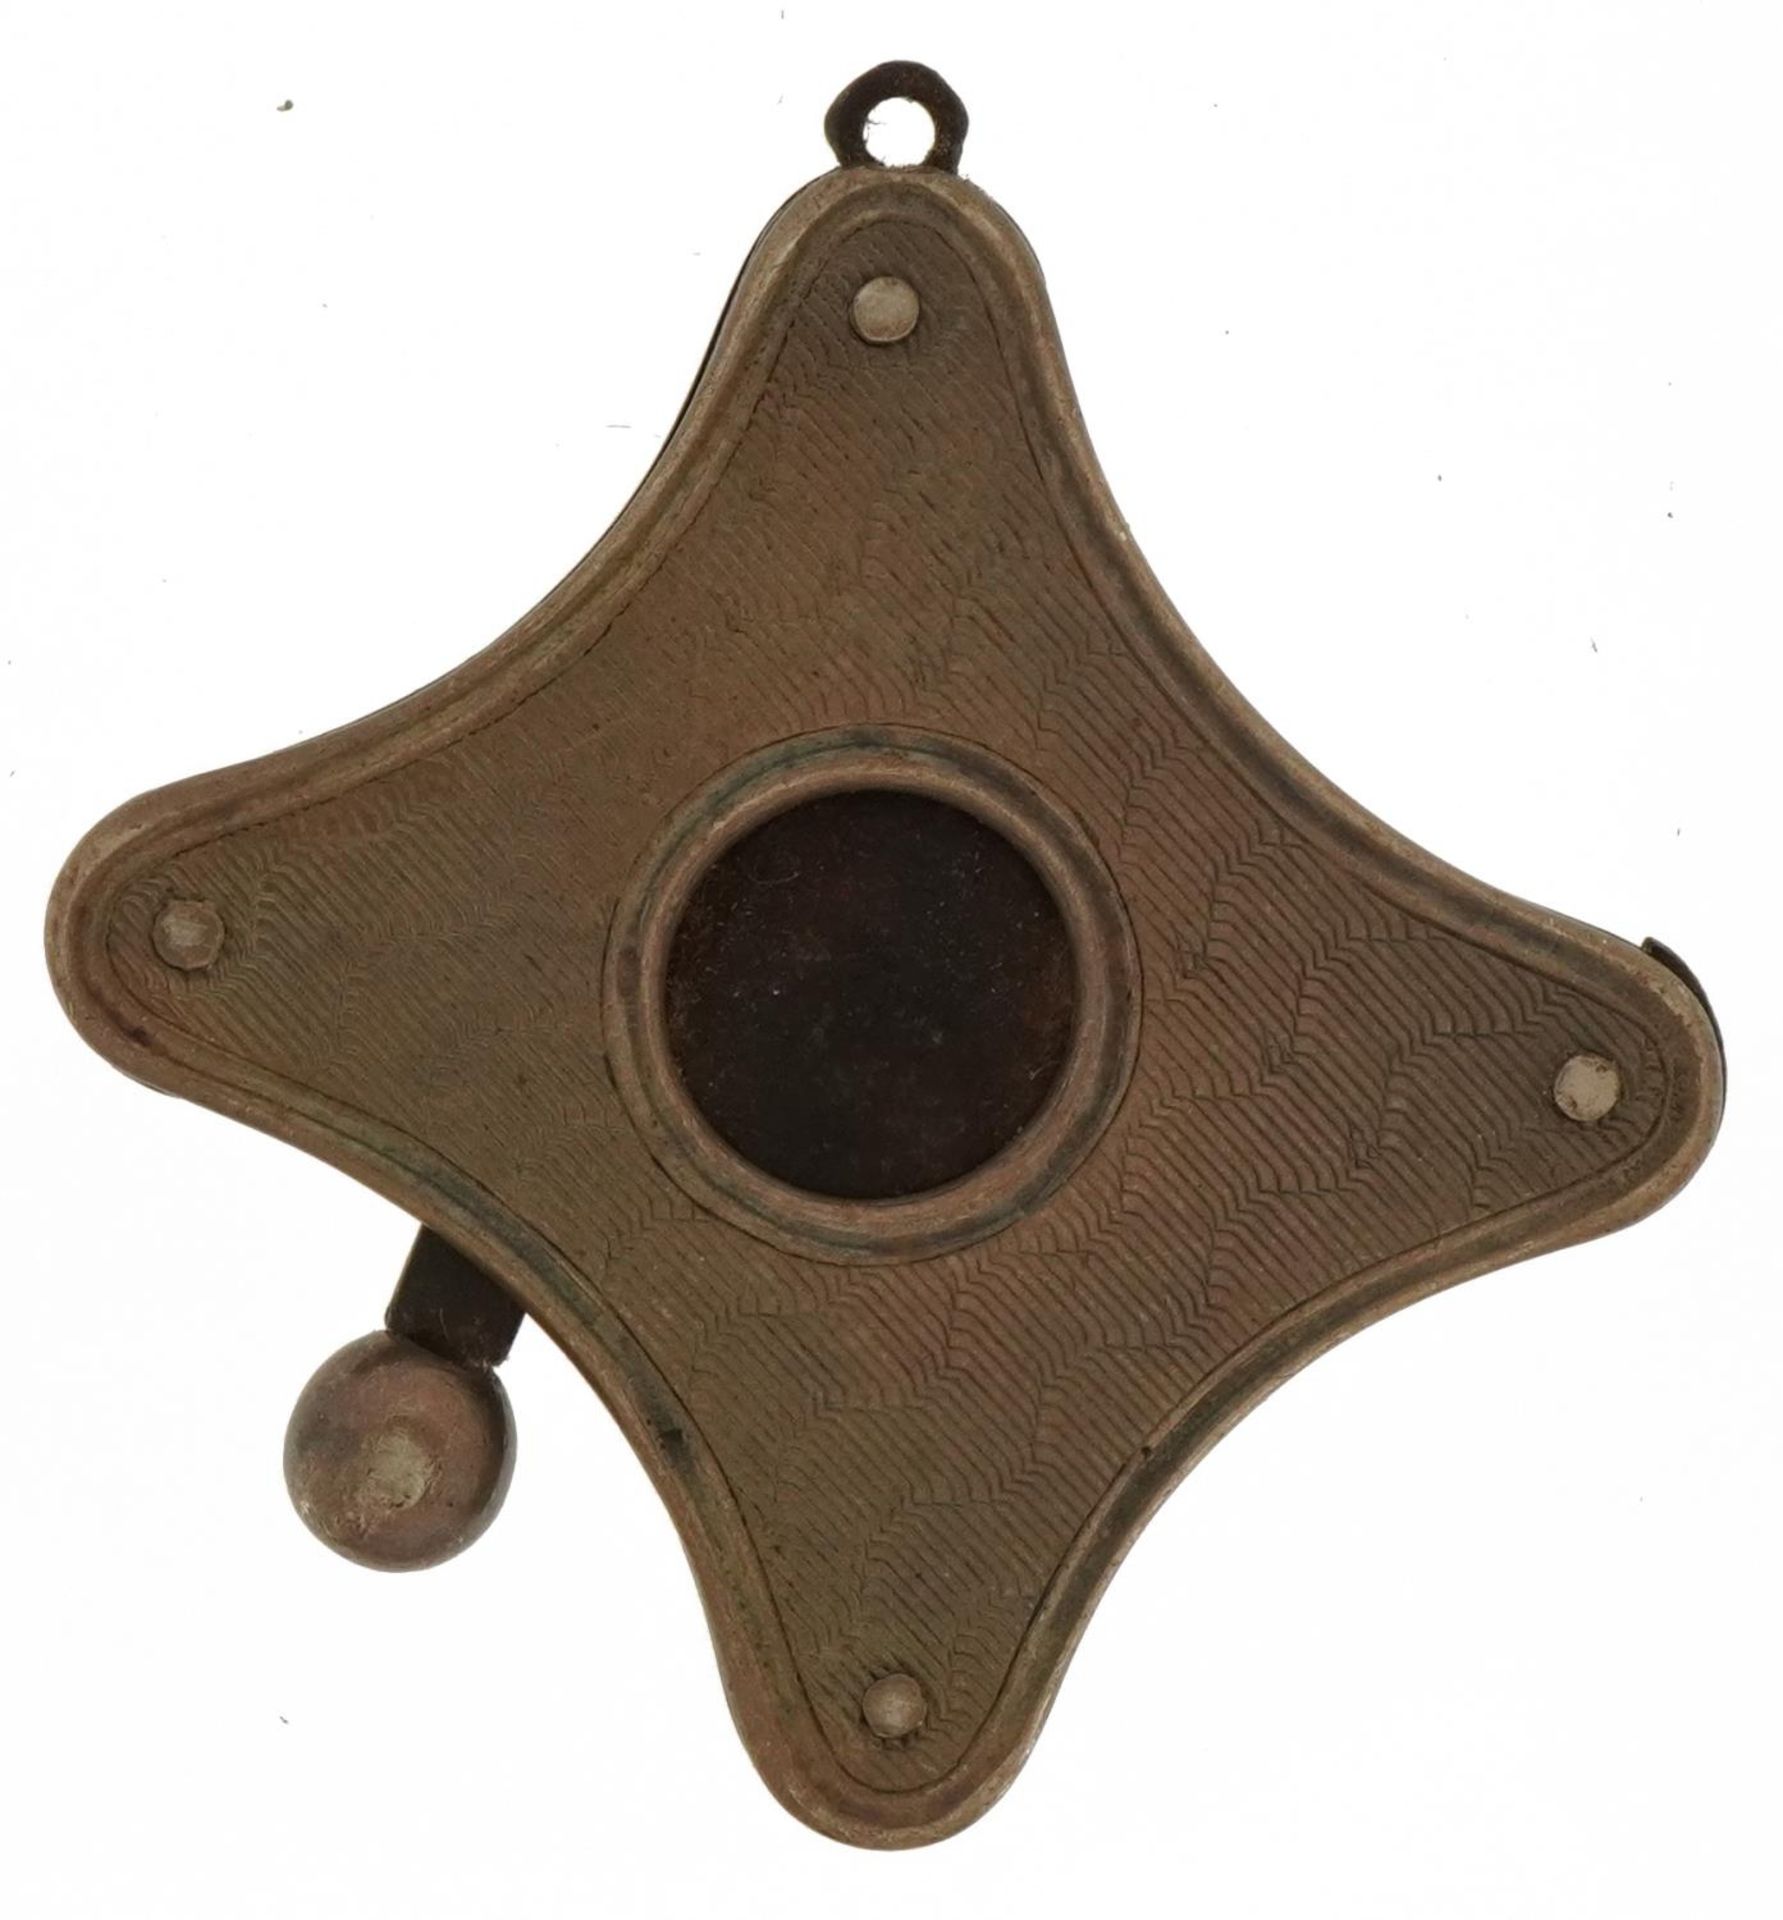 Unmarked silver engine turned cigar cutter, 2.7cm wide, 9.8g